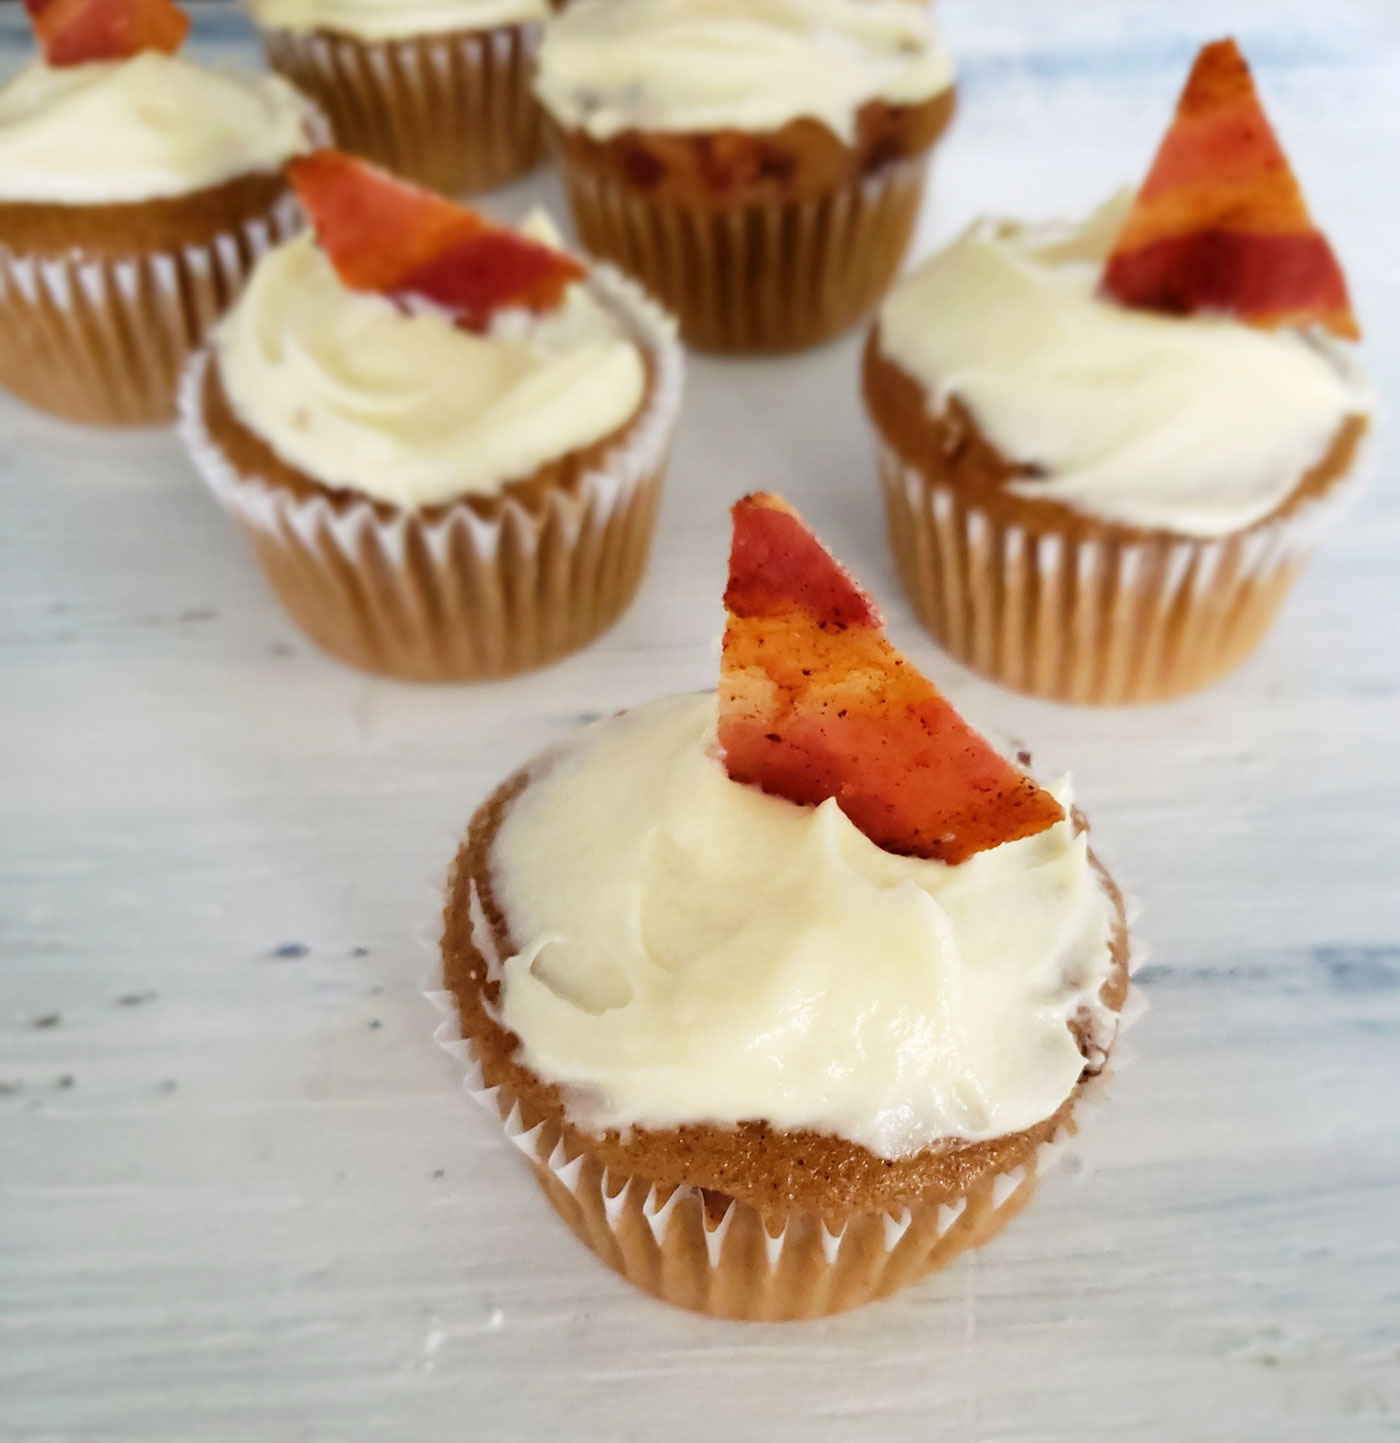 Sweet and savory spiced cupcakes made with bacon and real cream cheese frosting